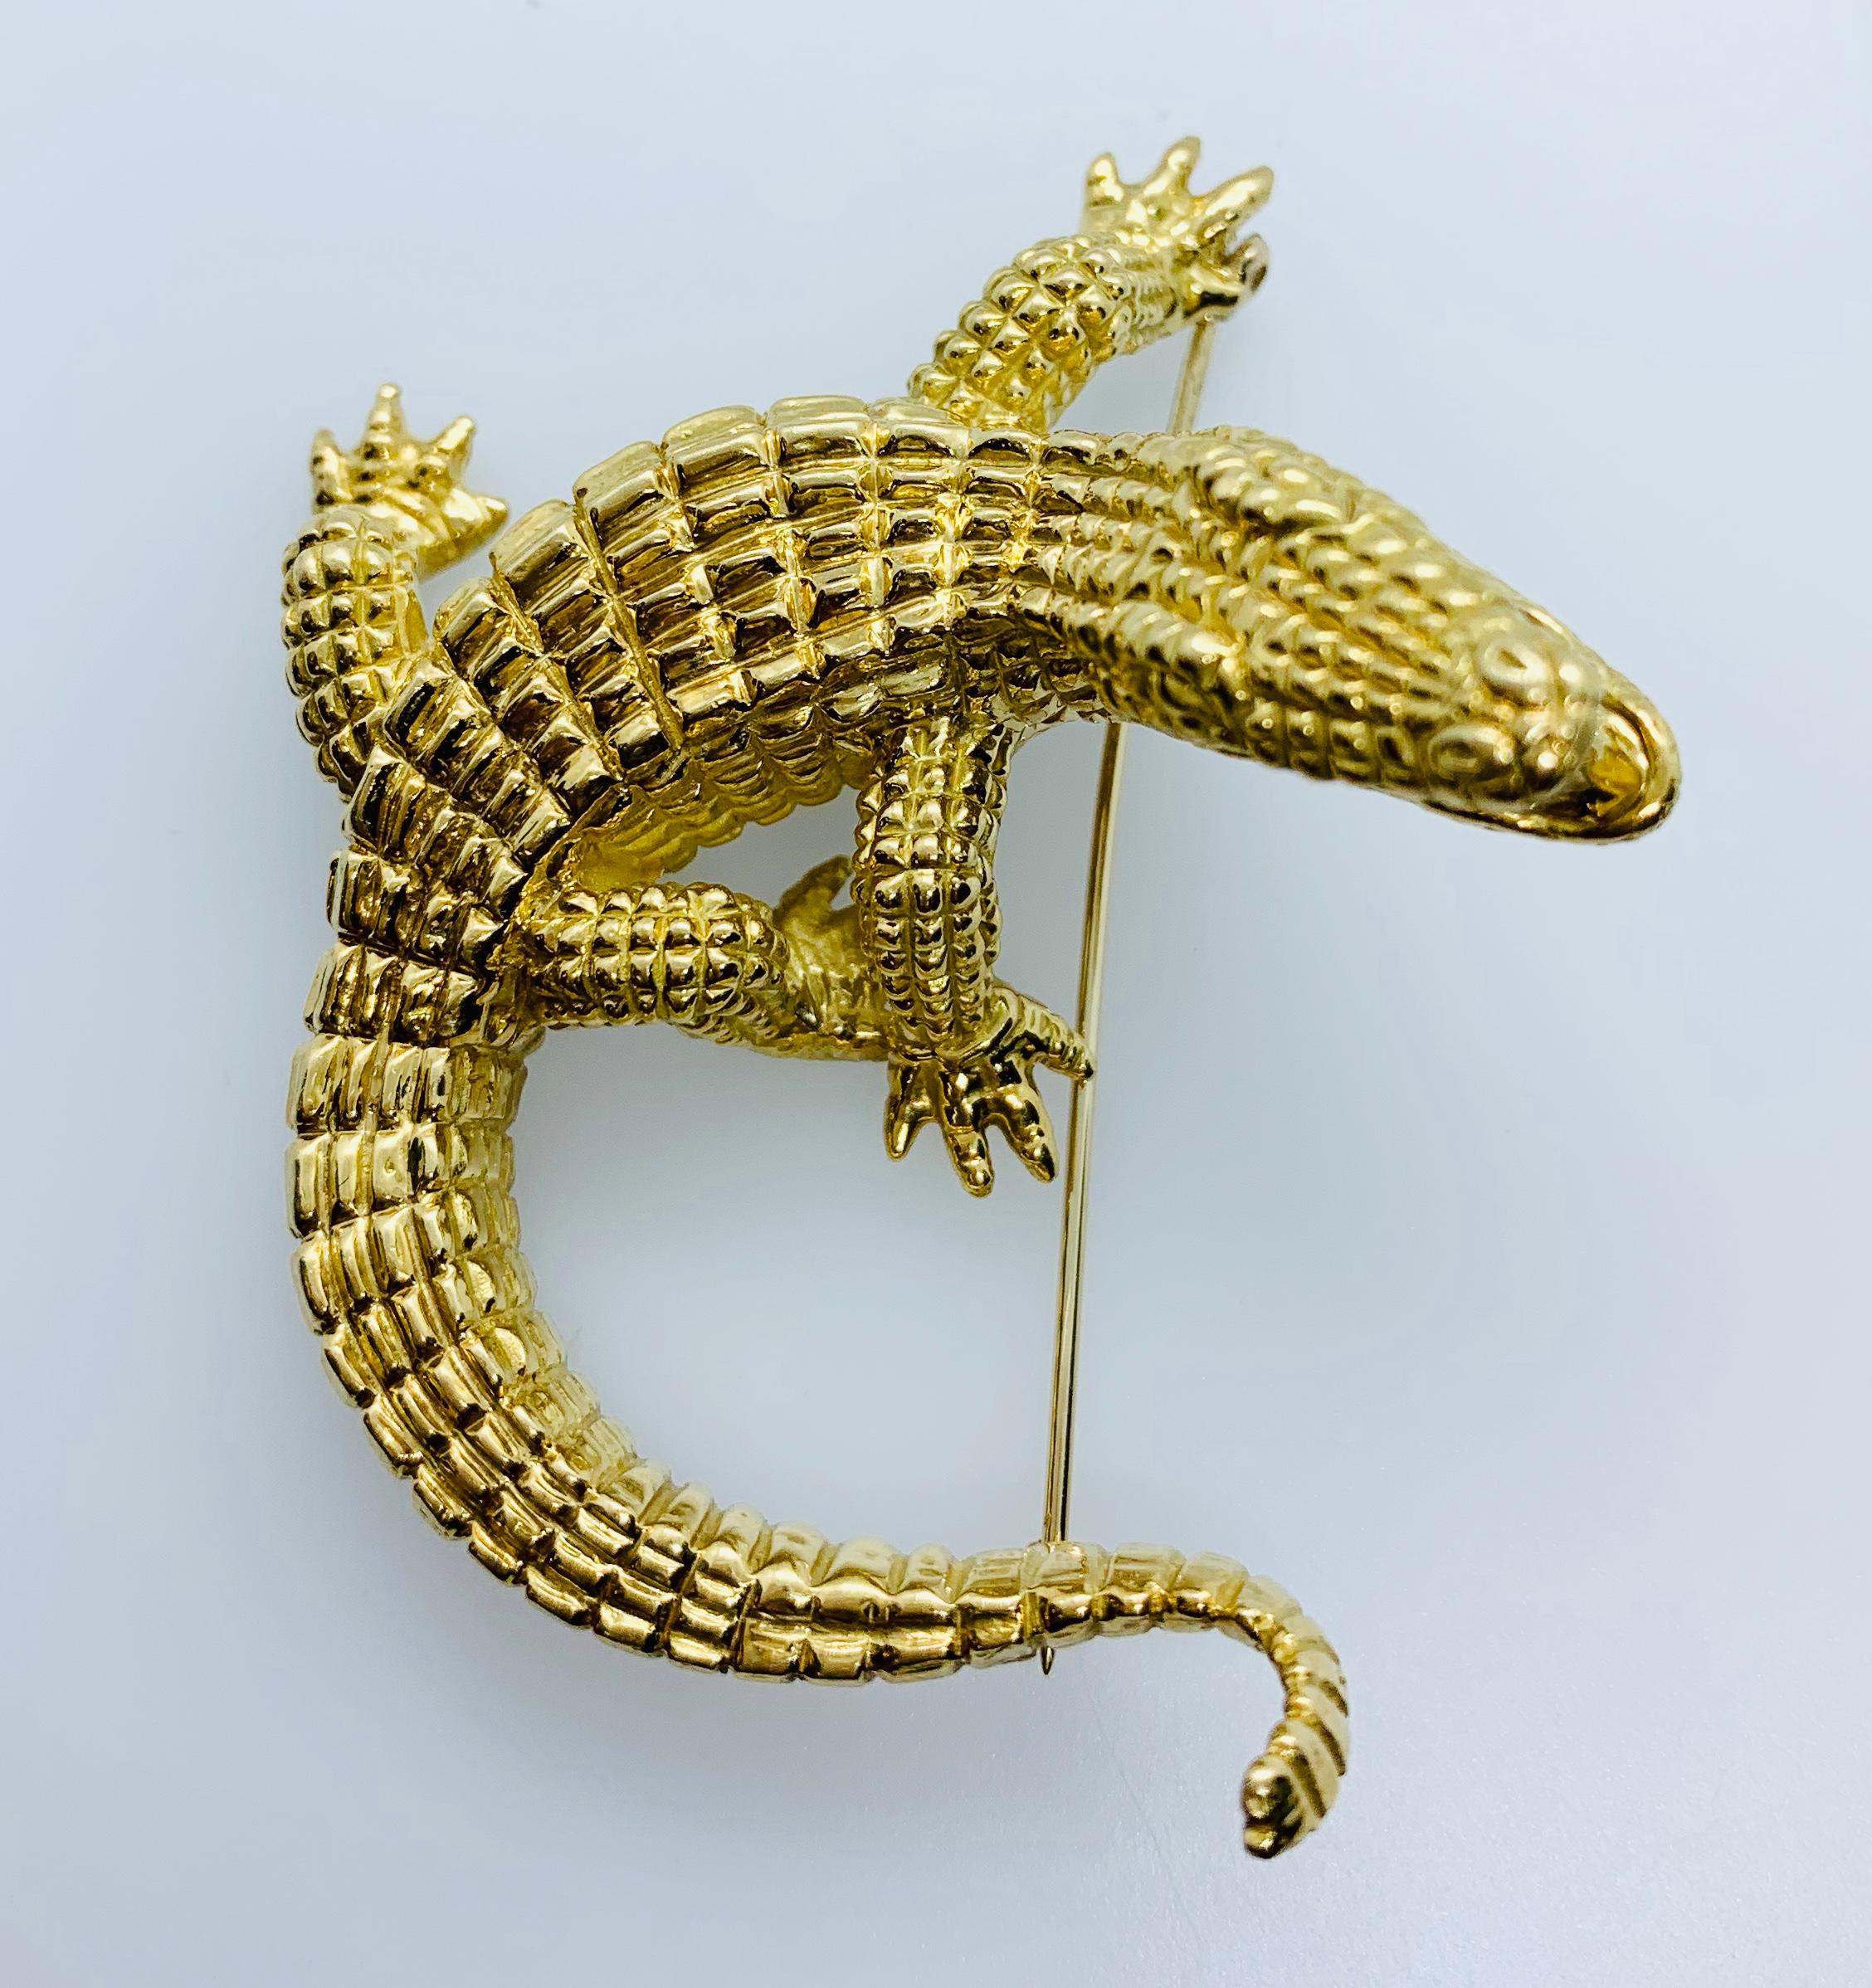 Gorgeous Designer Craig Drake Alligator Brooch in Excellent condition! It is made in 18K Yellow Gold with beautiful detail. He measures 2.5 inches by 2 inches and weighs 38.3 grams.